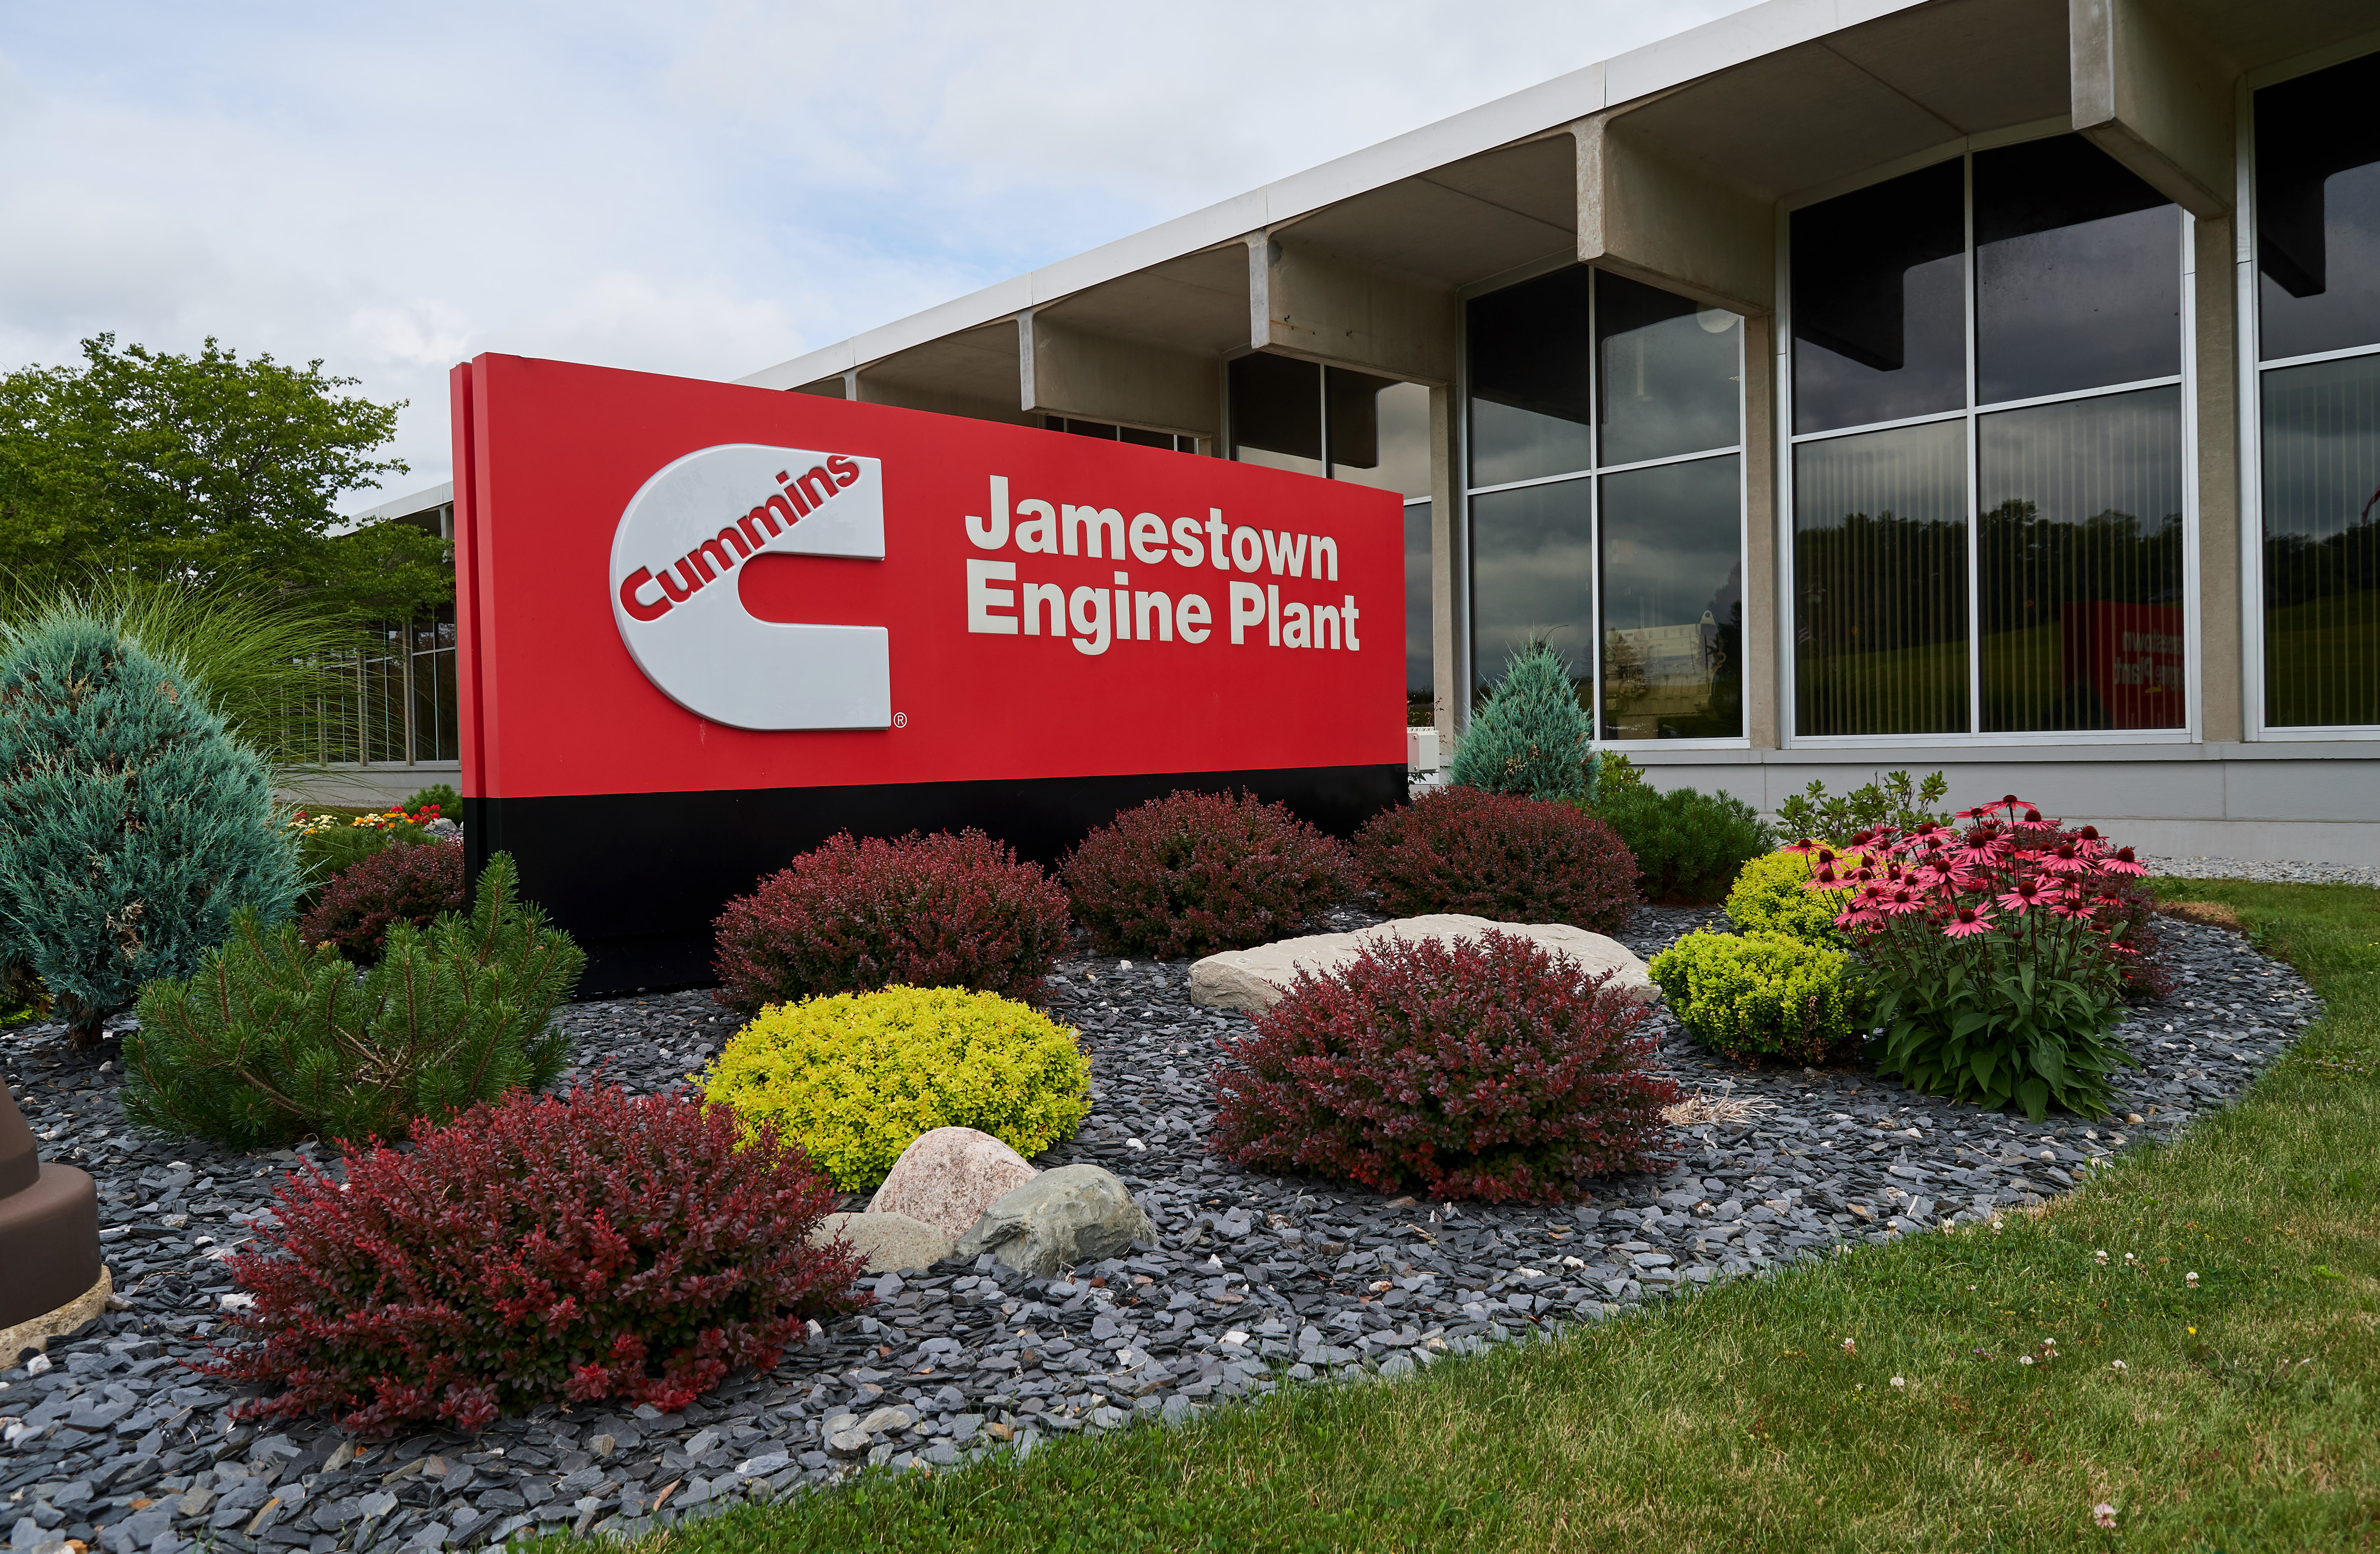 The Jamestown Engine Plant is home to the production of X12 and X15 engines, among other products.